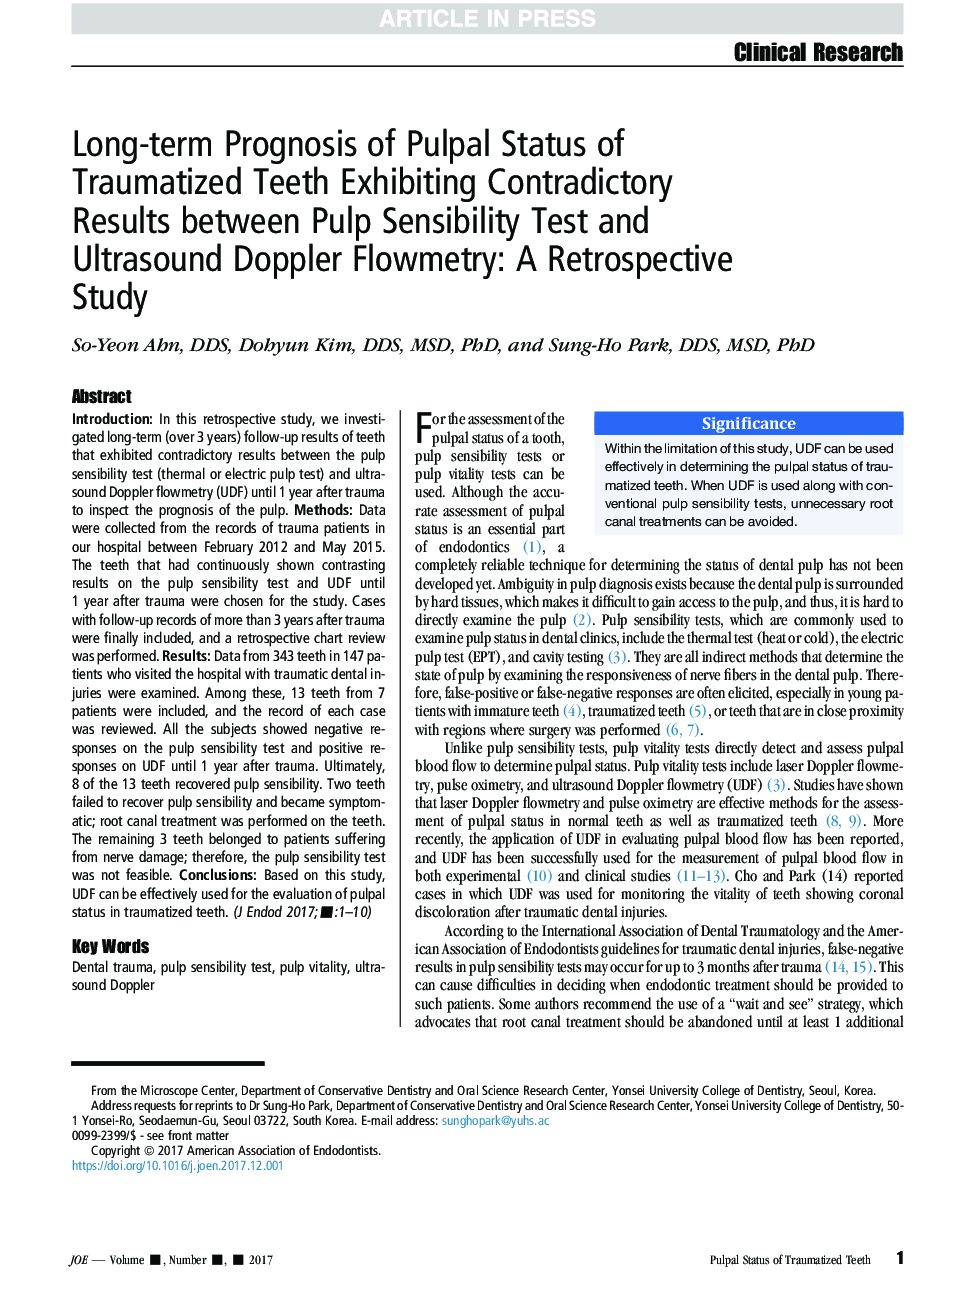 Long-term Prognosis of Pulpal Status of Traumatized Teeth Exhibiting Contradictory Results between Pulp Sensibility Test and Ultrasound Doppler Flowmetry: A Retrospective Study